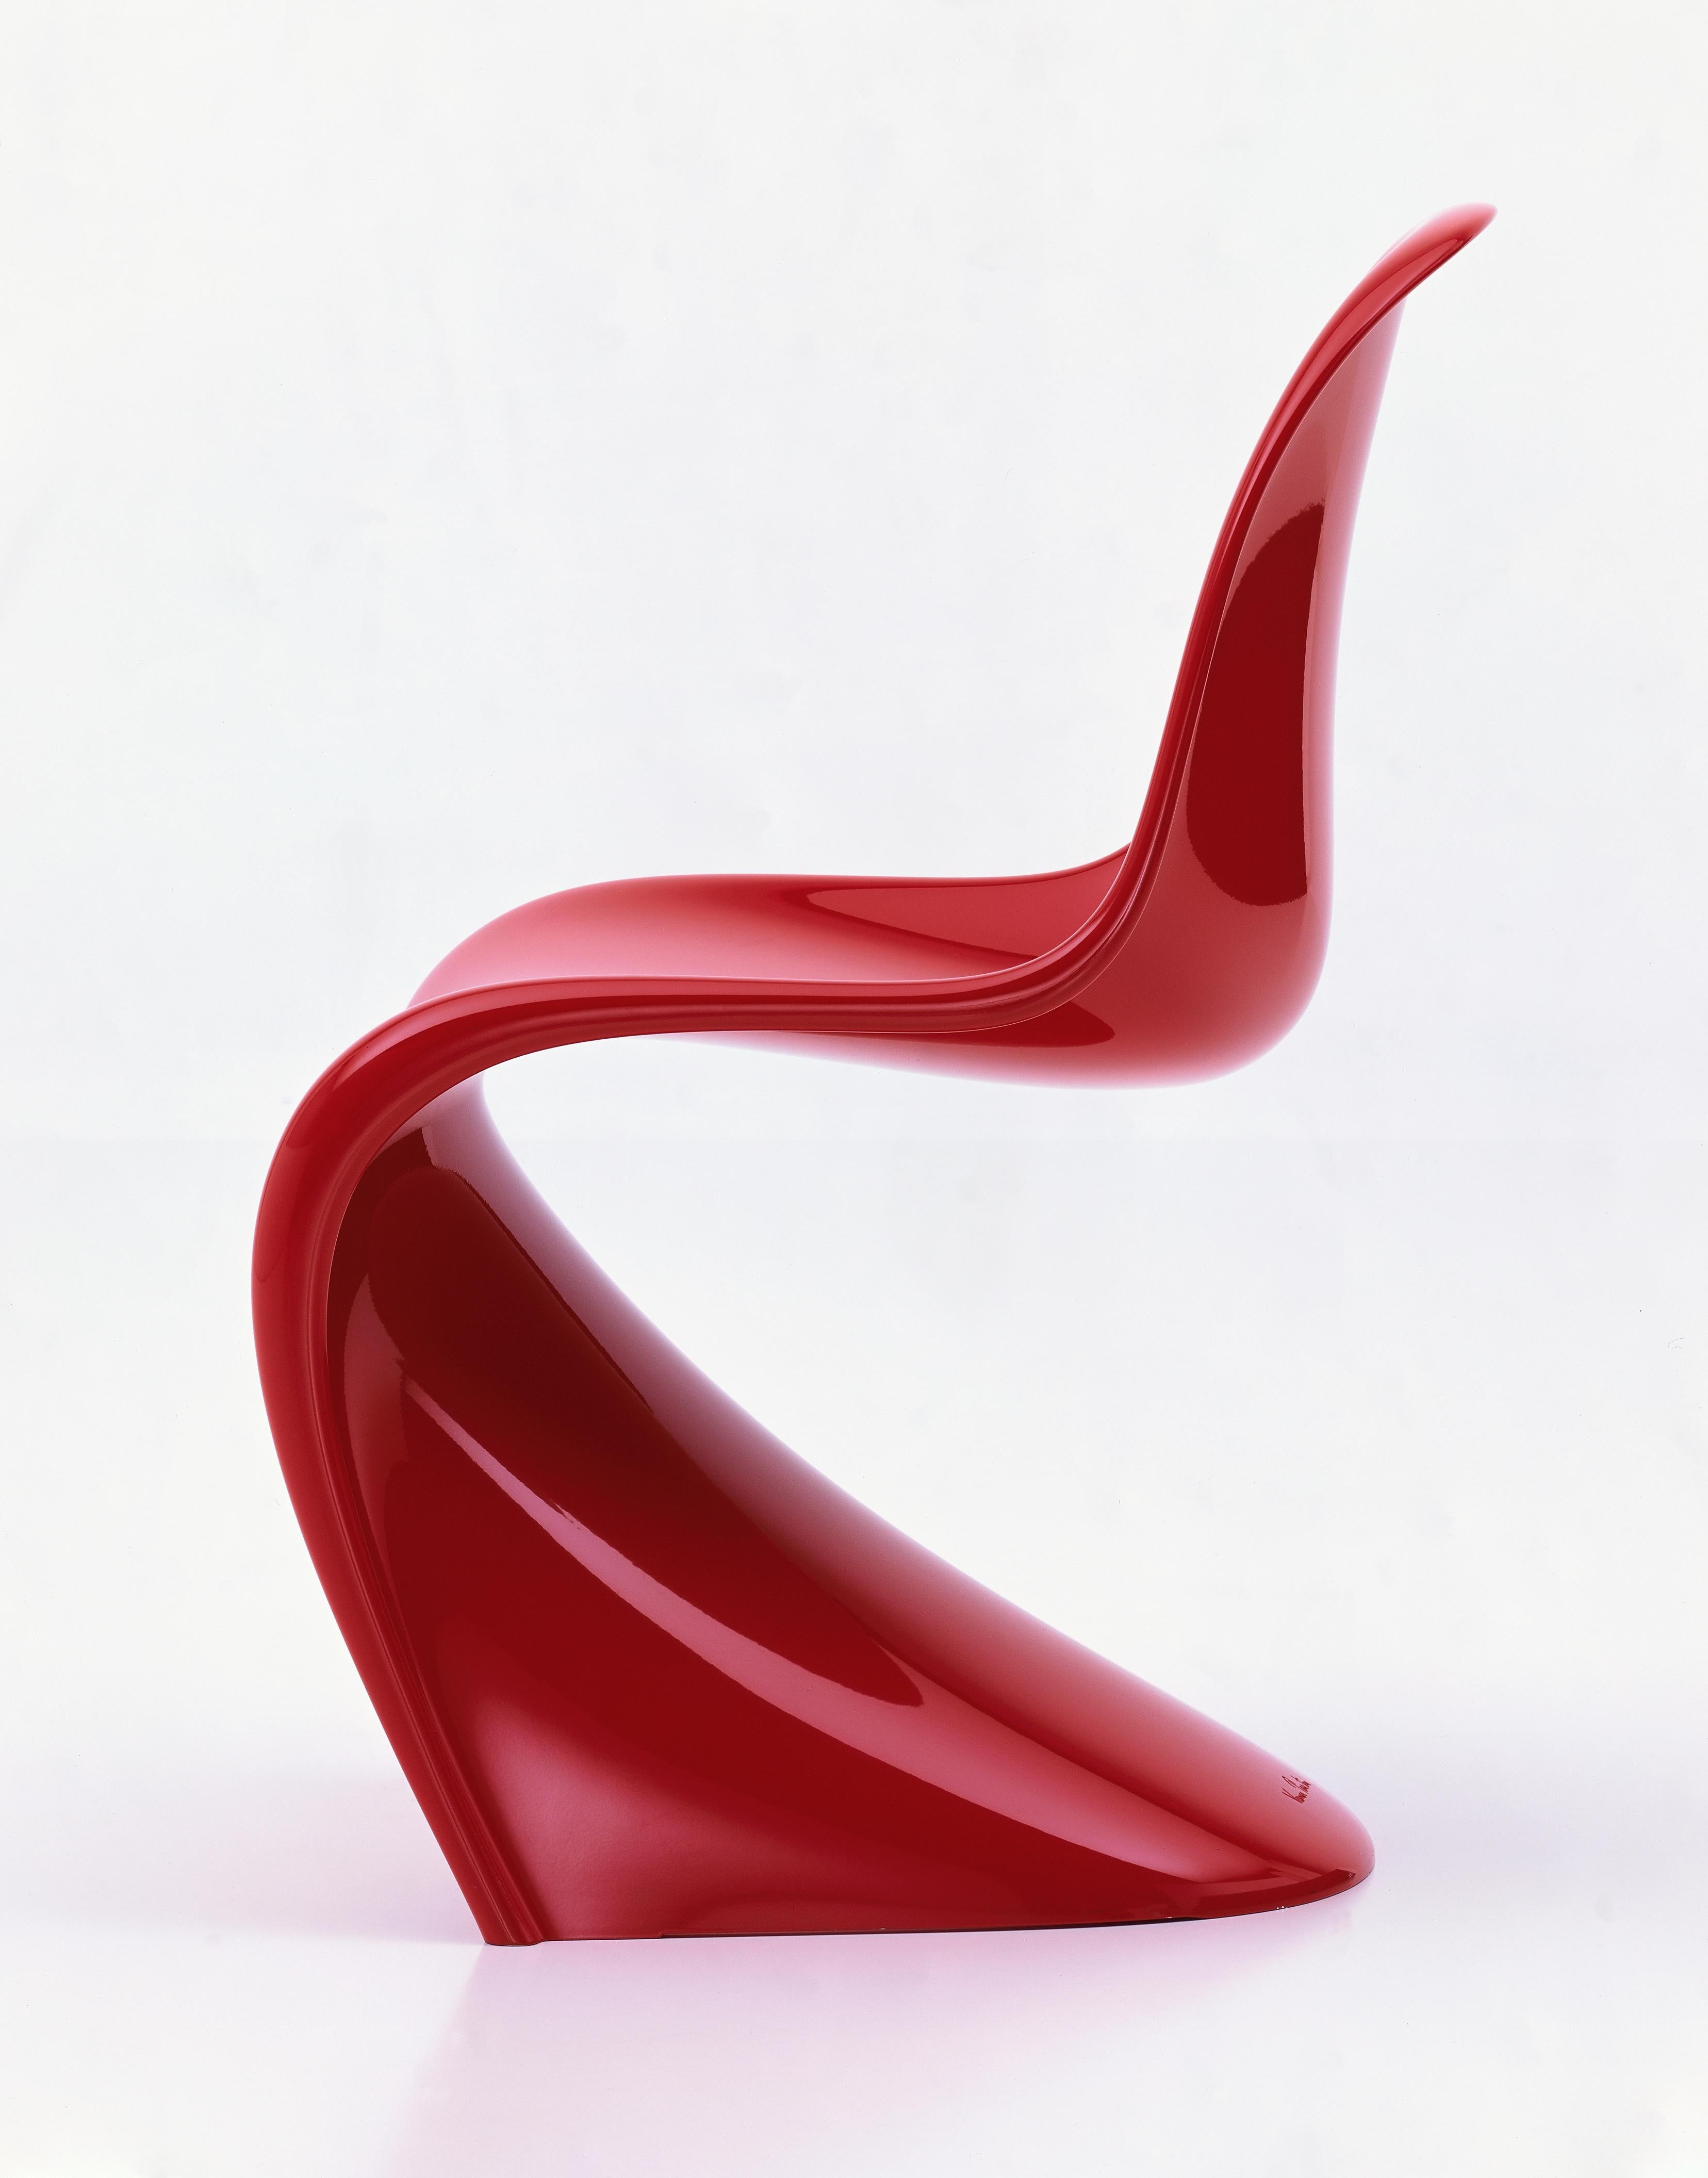 Modern Vitra Classic Panton Chair in Lacquered Red by Verner Panton For Sale